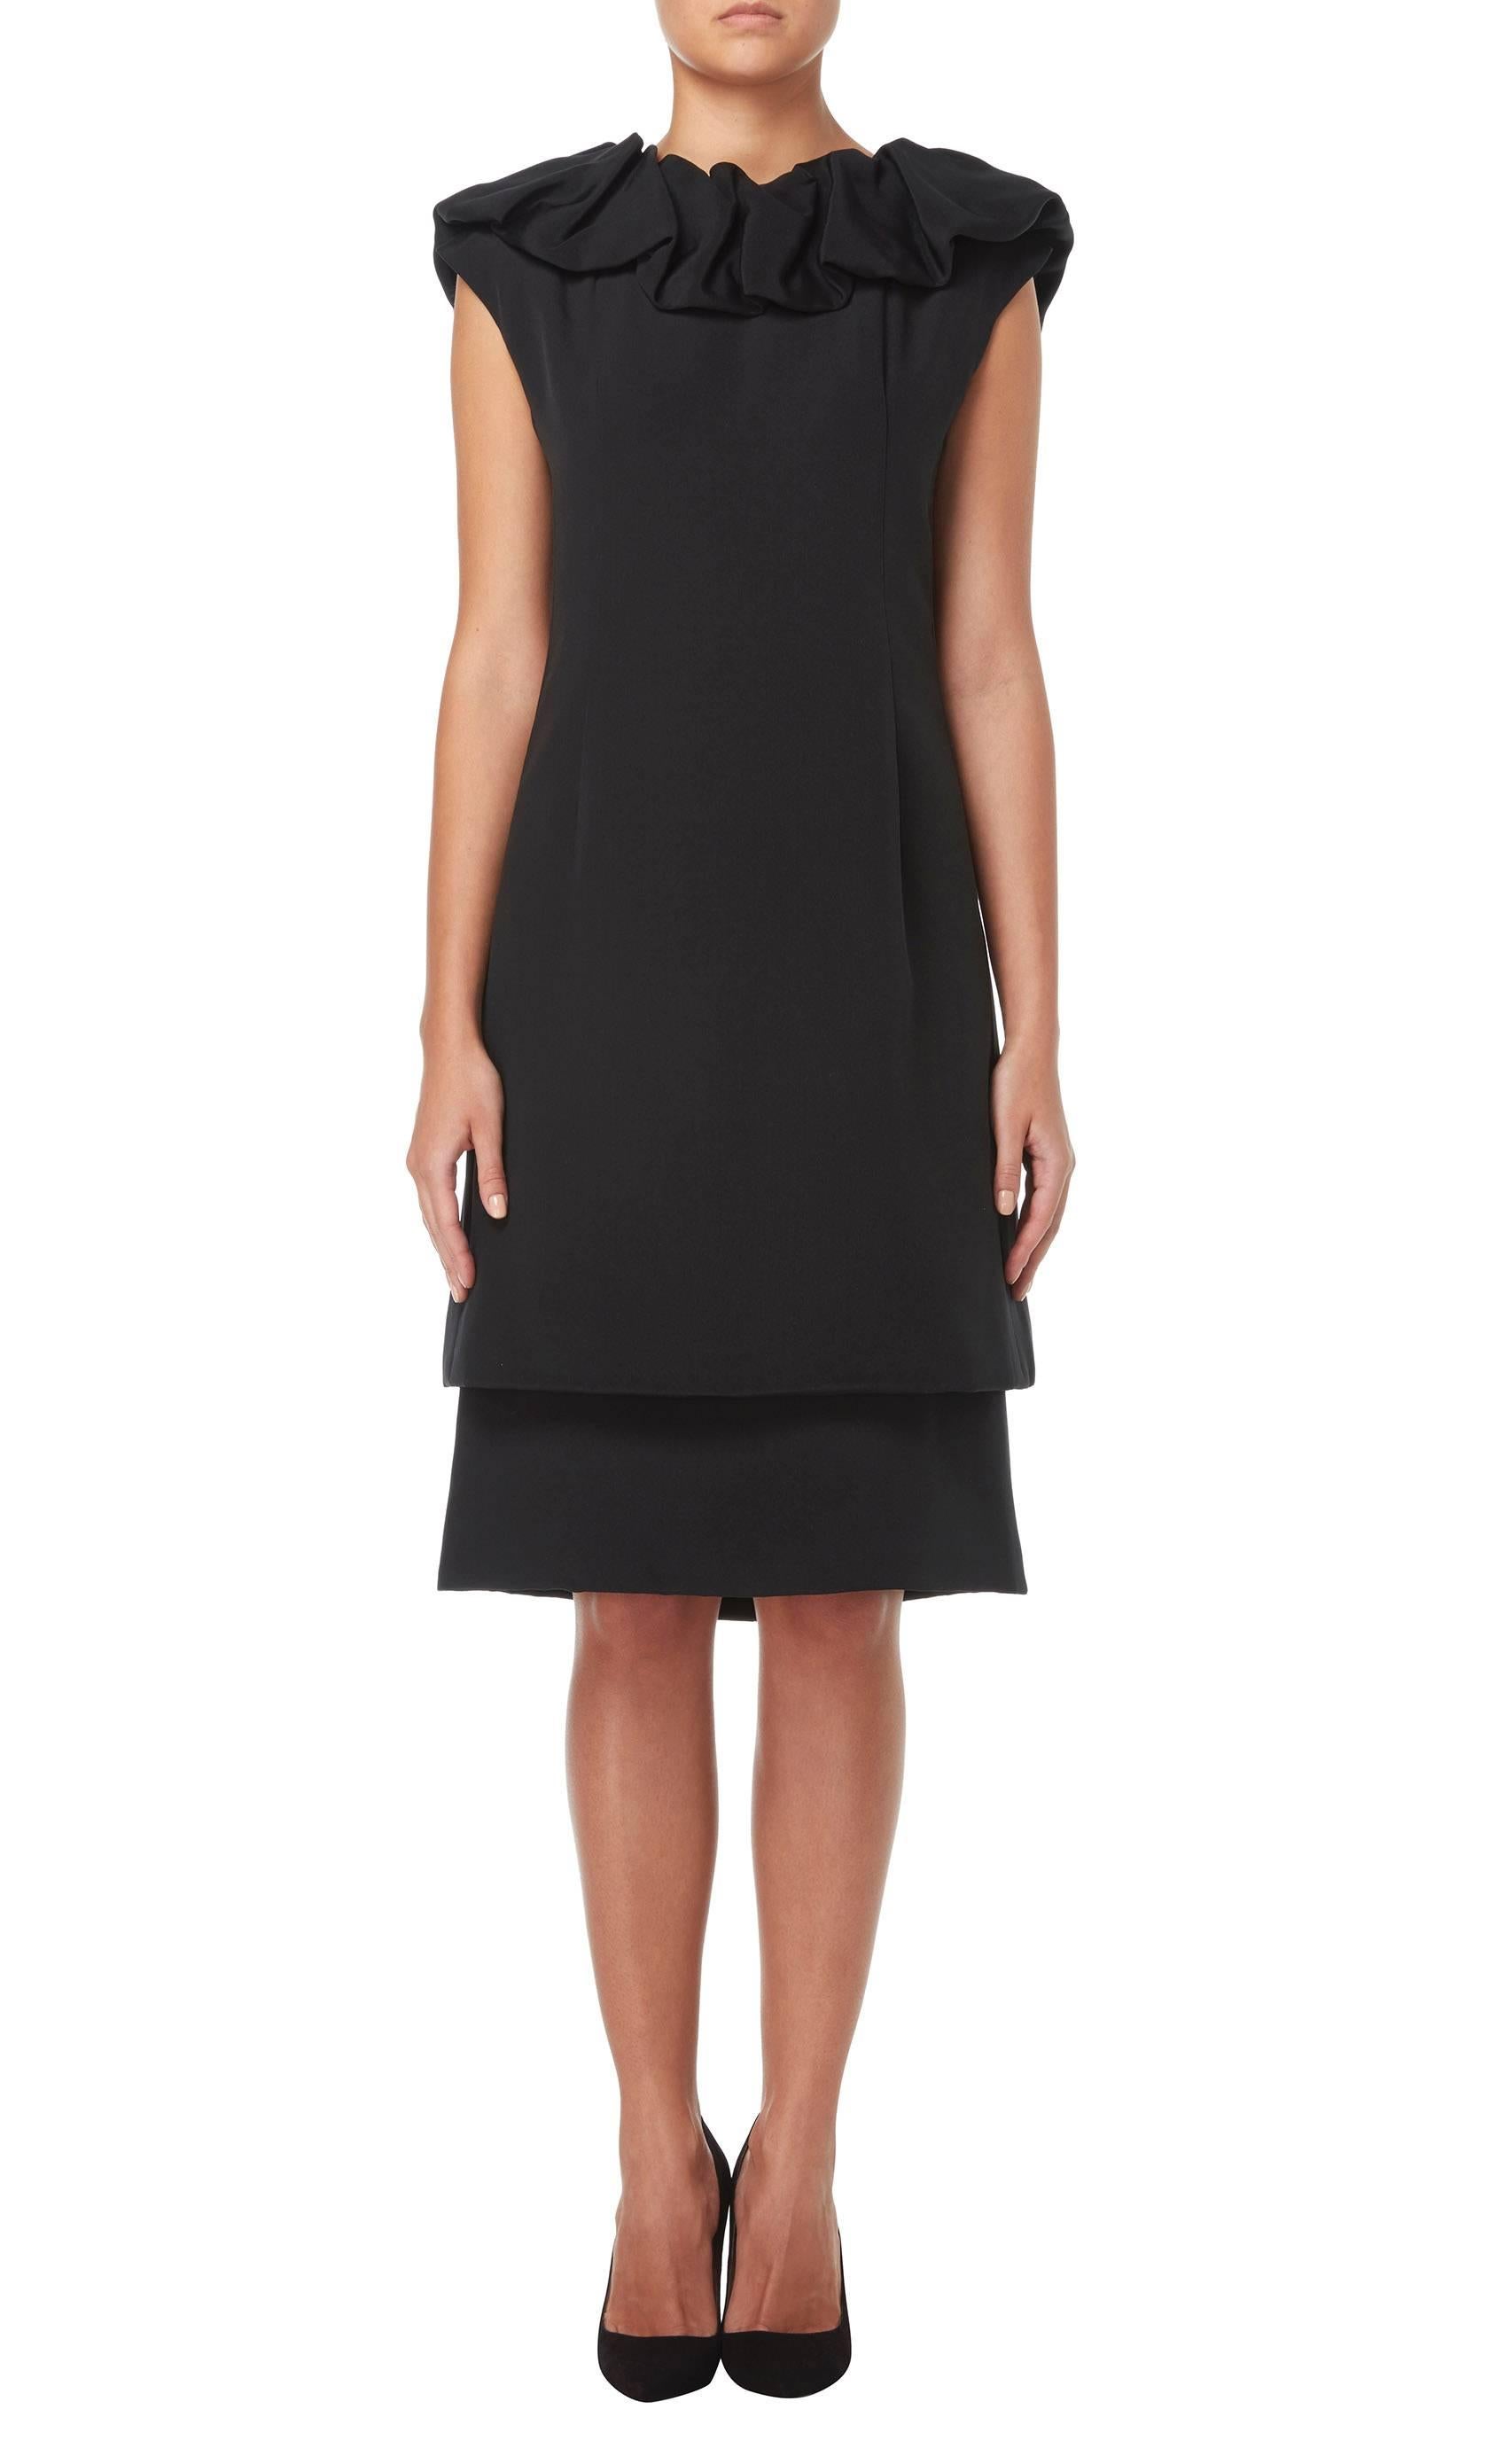 A twist on the classic LBD, this Dior dress is made up of a black silk under dress with a separate tunic over the top, creating a layered effect. The tunic features an exaggerated ruffle collar, adding drama, while the A-line cut makes for a classic